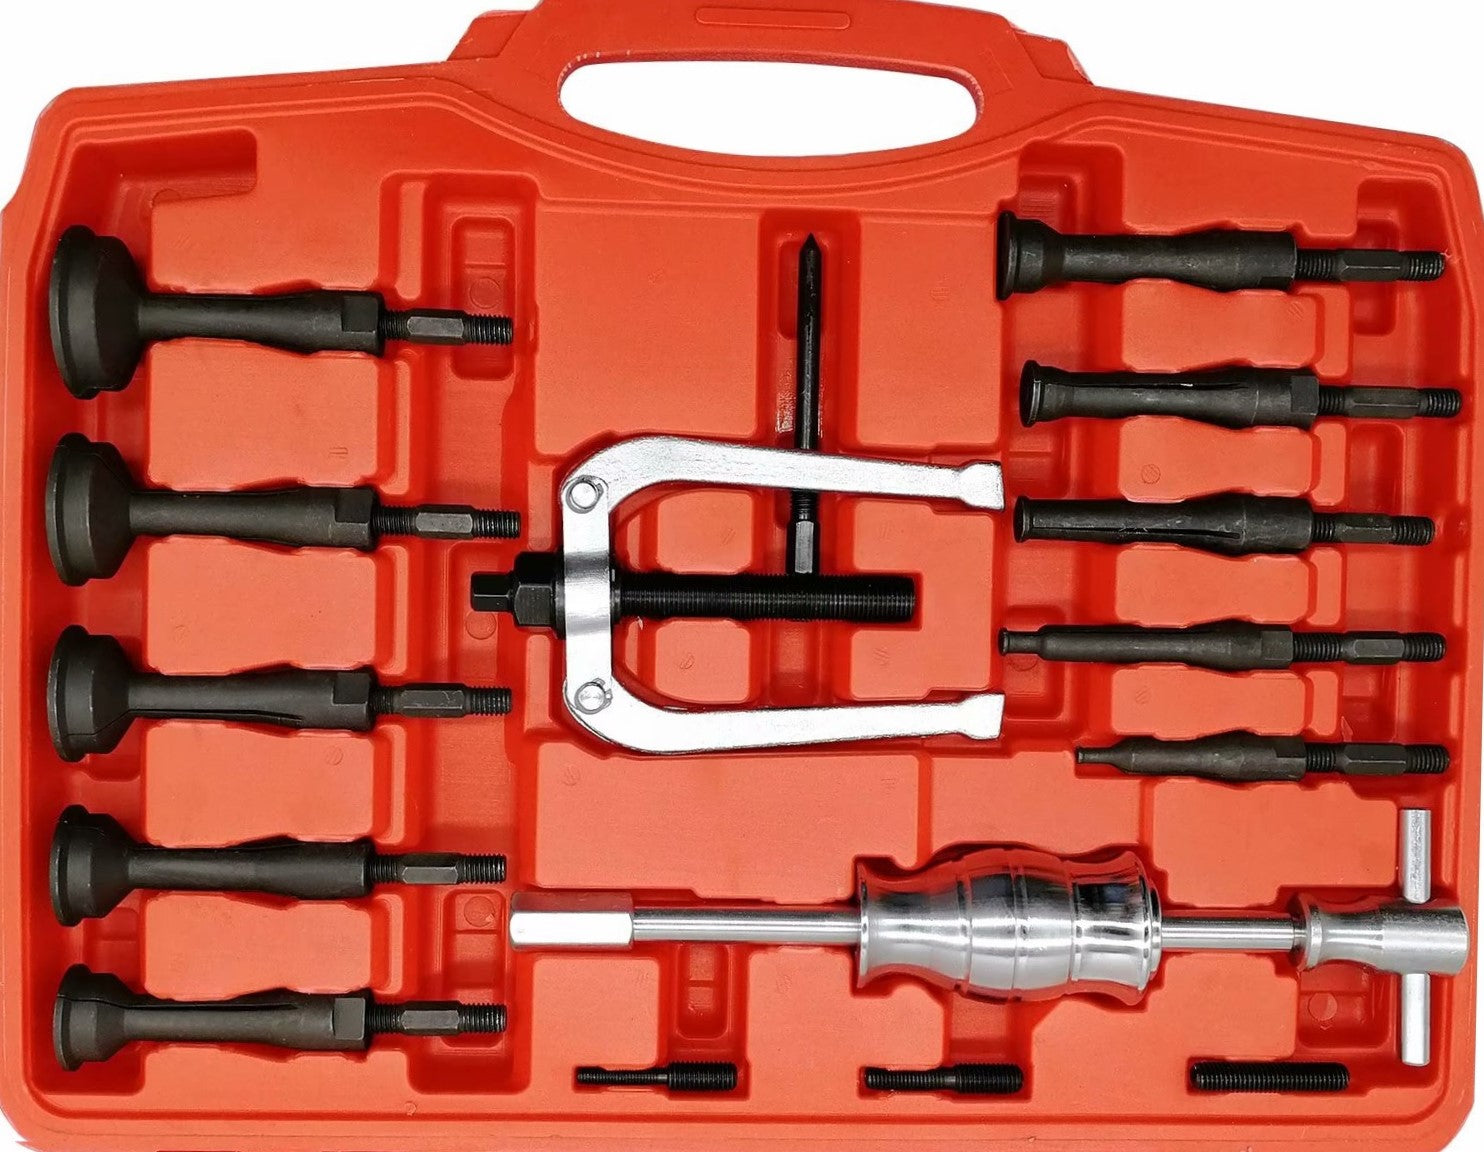 Blind Pilot Inner Bearing Puller and Slide Hammer Set with U-Shaped Bearing Puller 16pc - Specialist Tools Australia